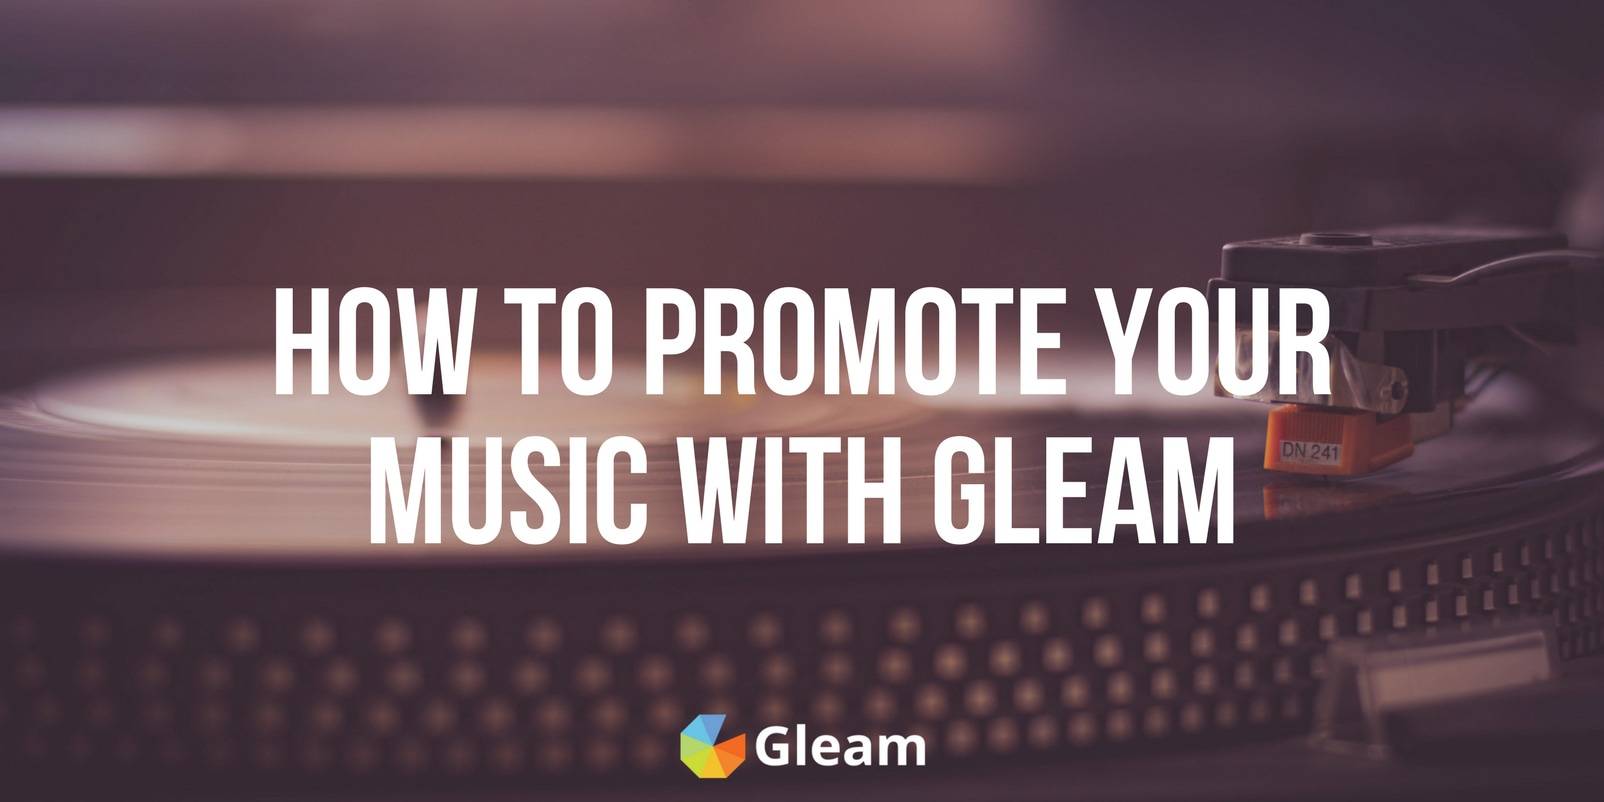 How to Promote Your Music with Gleam